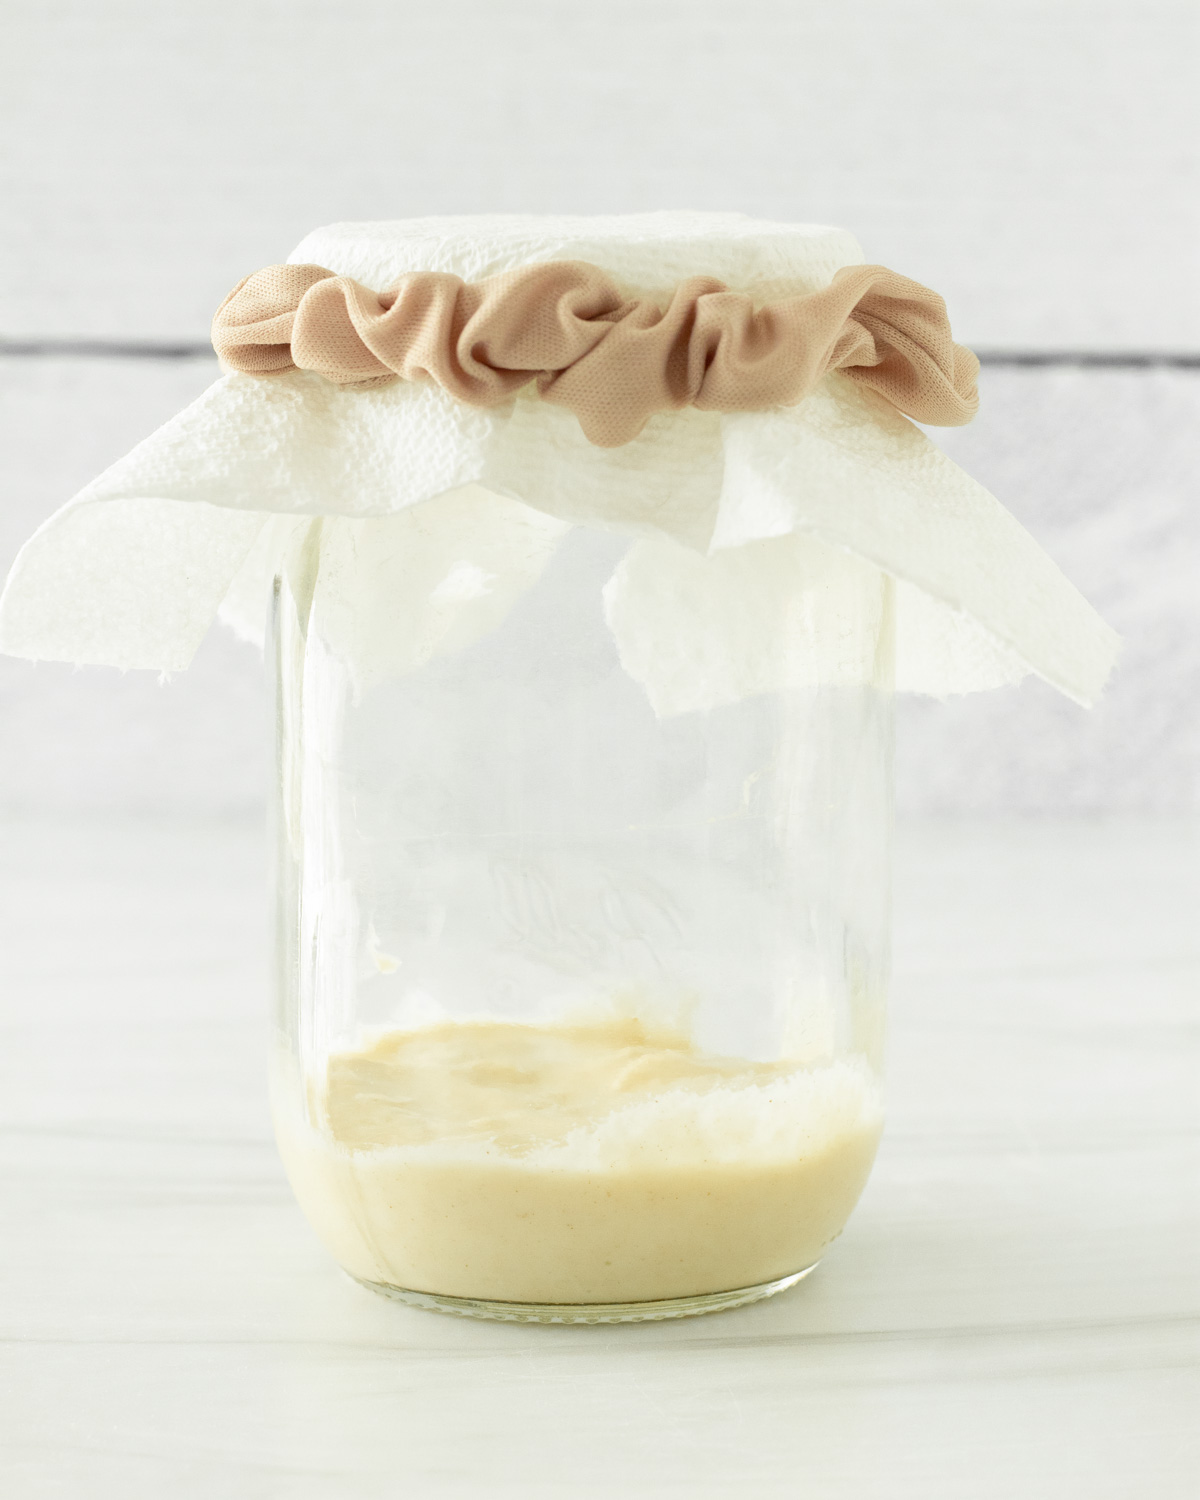 Cover the jar with a towel and set aside on the counter for 24 hours